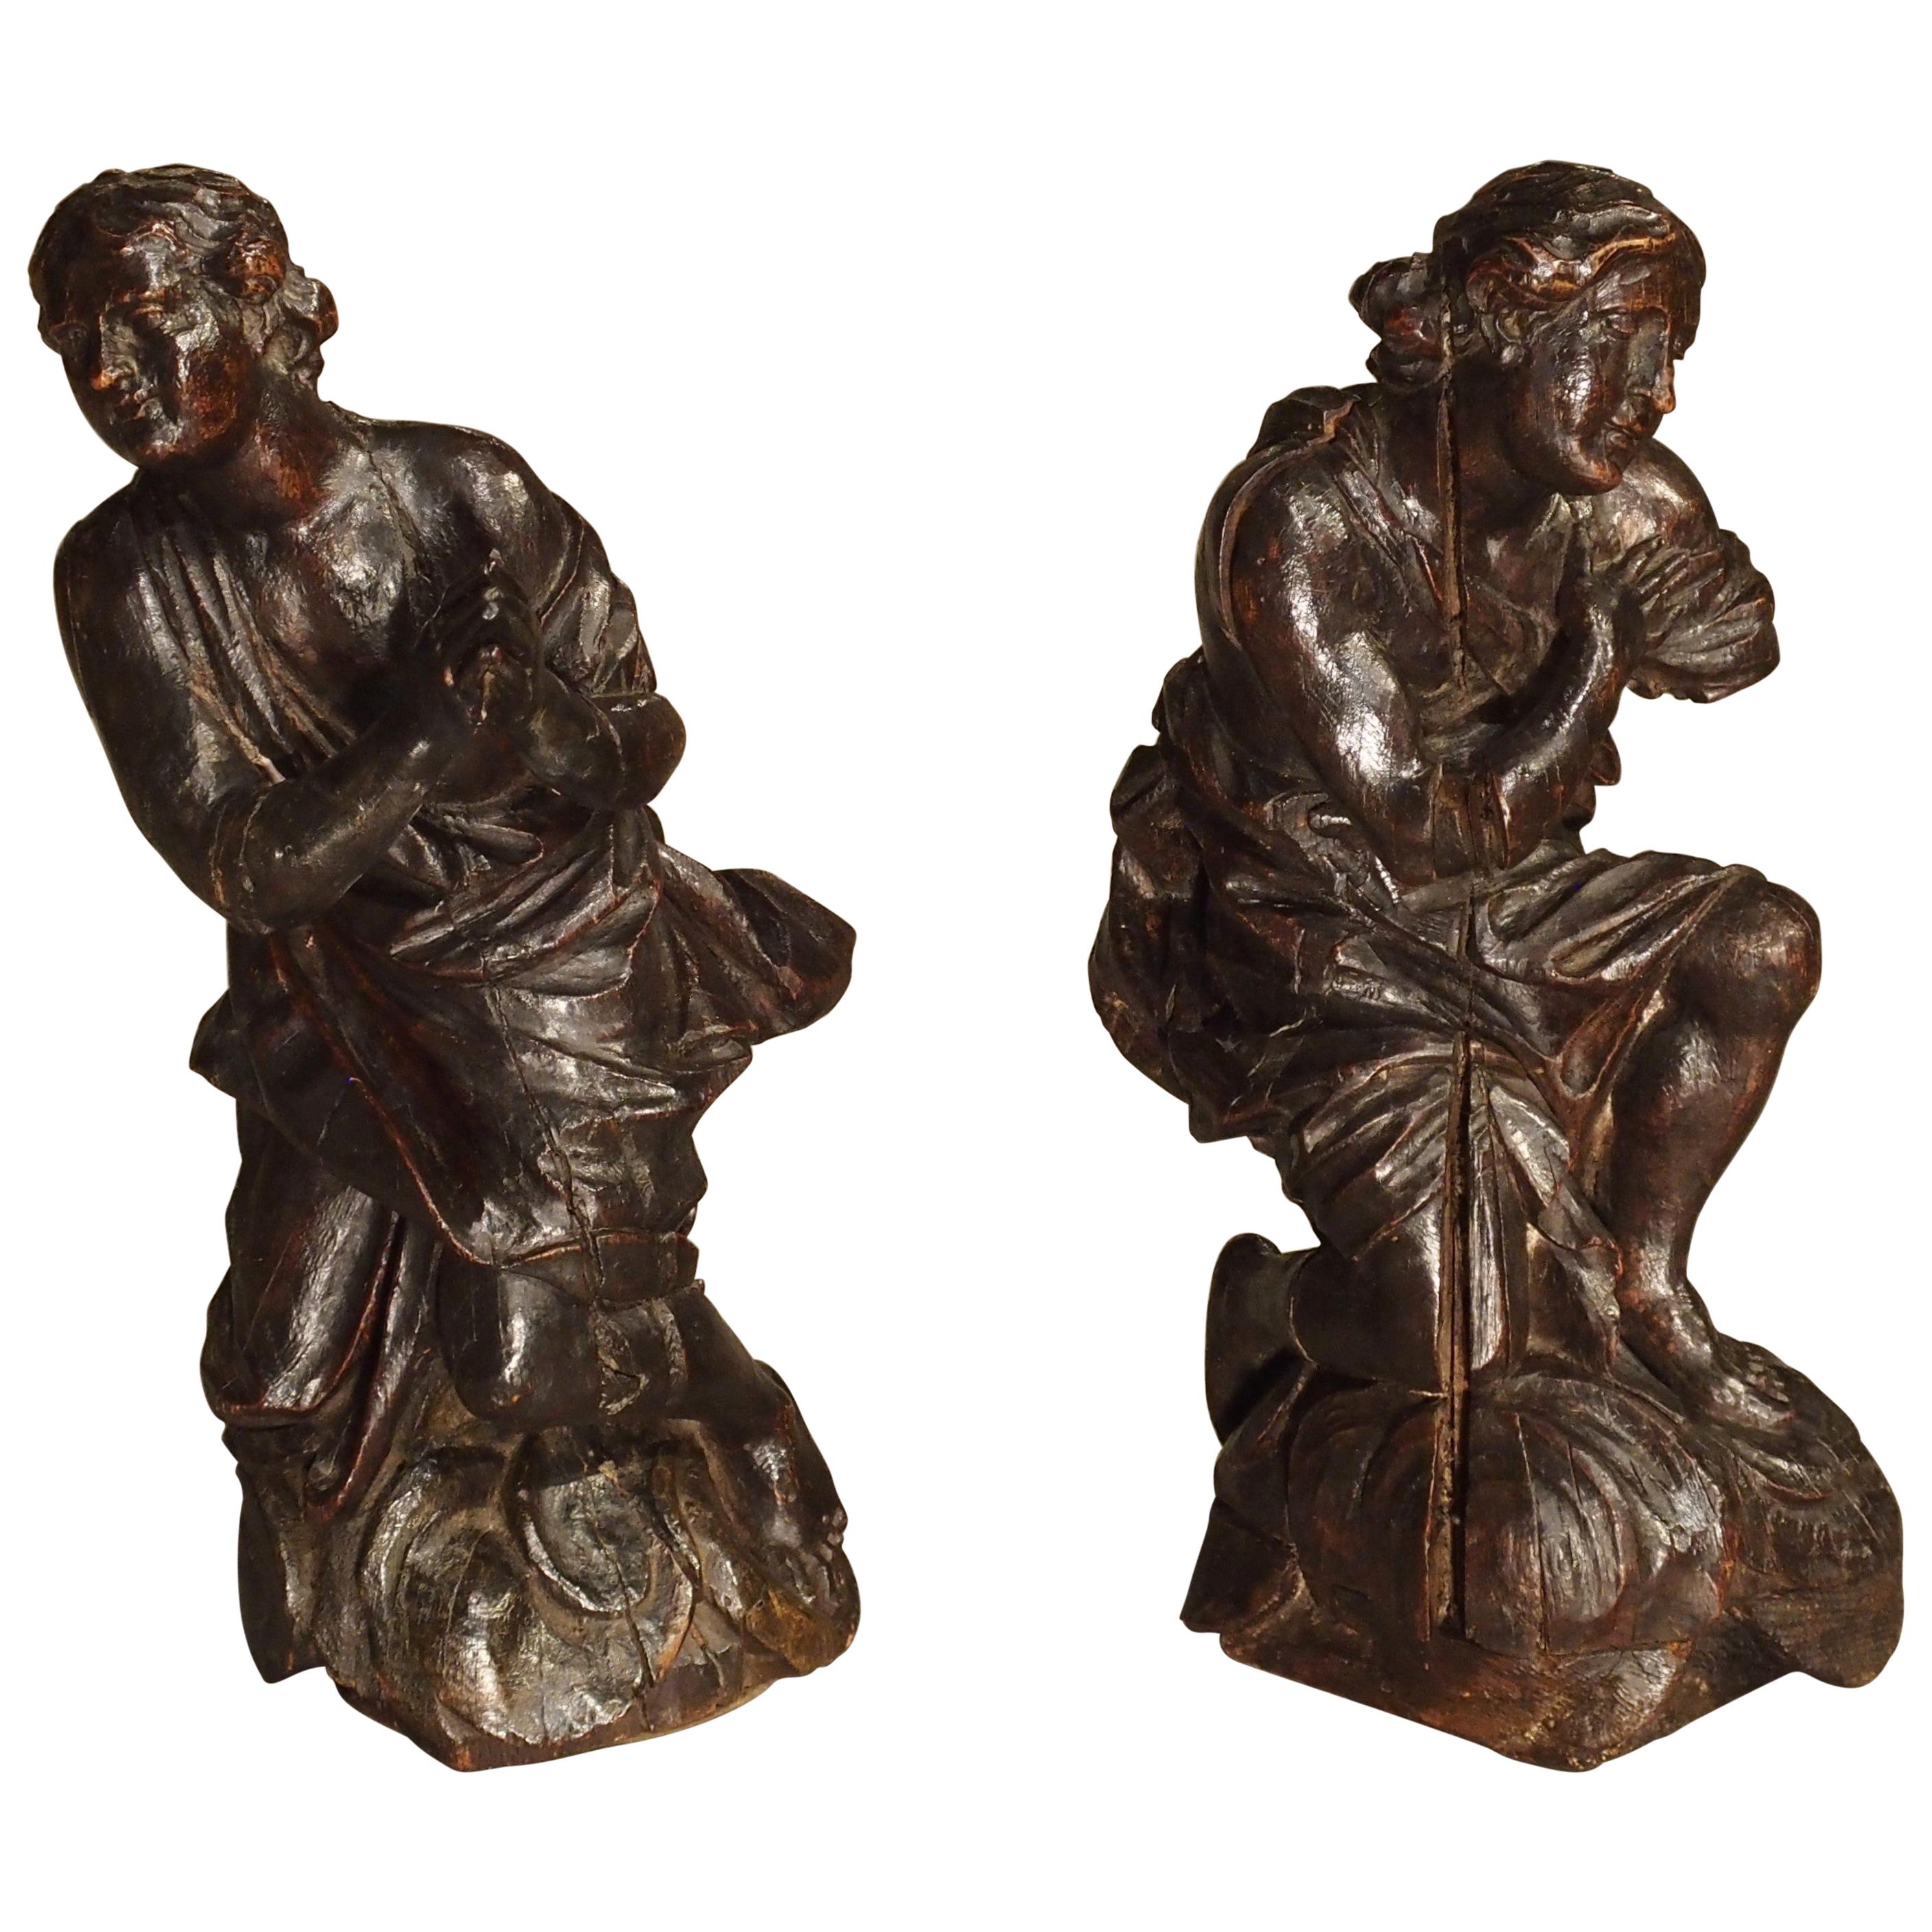 Pair of Small 18th Century Carved Oak Statues from France